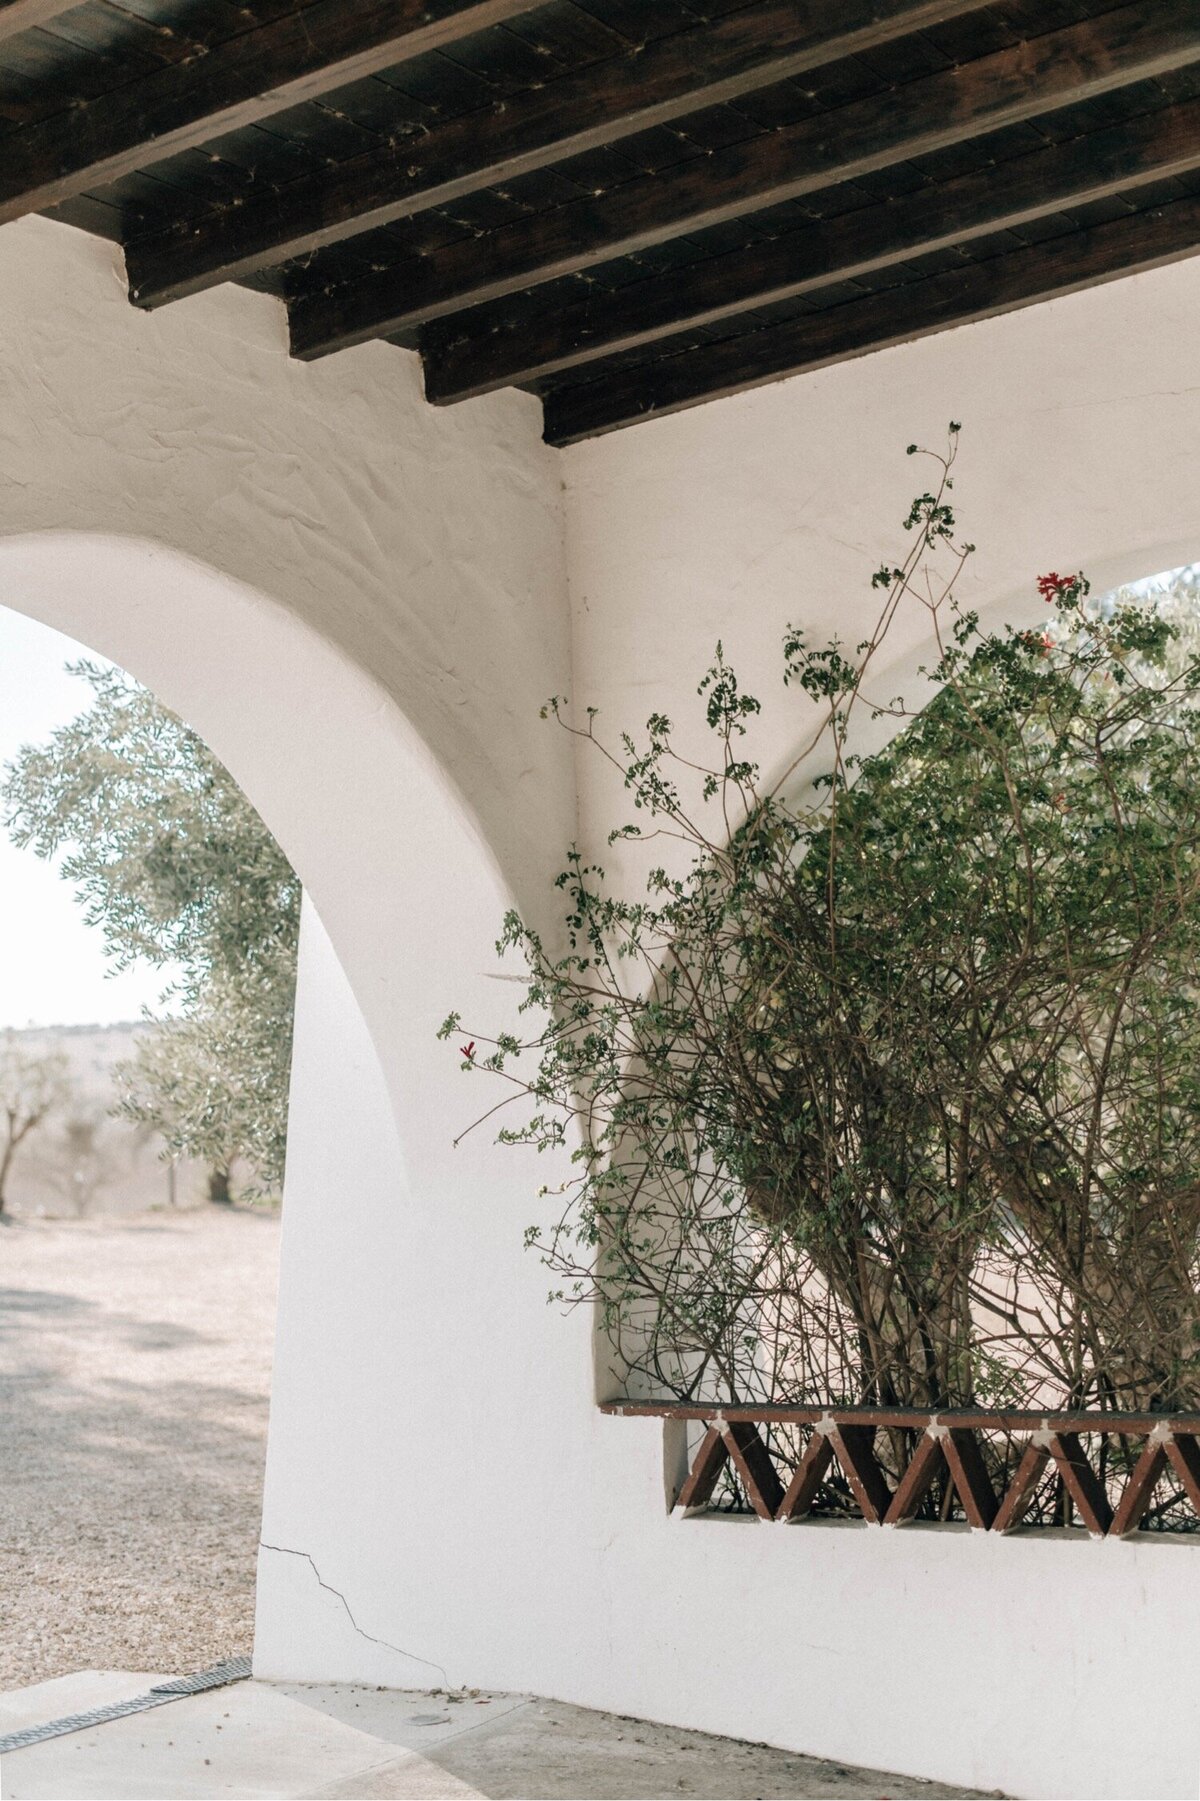 01_Flora_And_Grace_Portugal_Editorial_Wedding_Photographer Lisboa_Wedding_Photographer-10_A modern luxury wedding at Malhadina Nova in Portugal in the Alentejo region. Understated elegance and sleek aesthetic captured by Flora and Grace Photography.